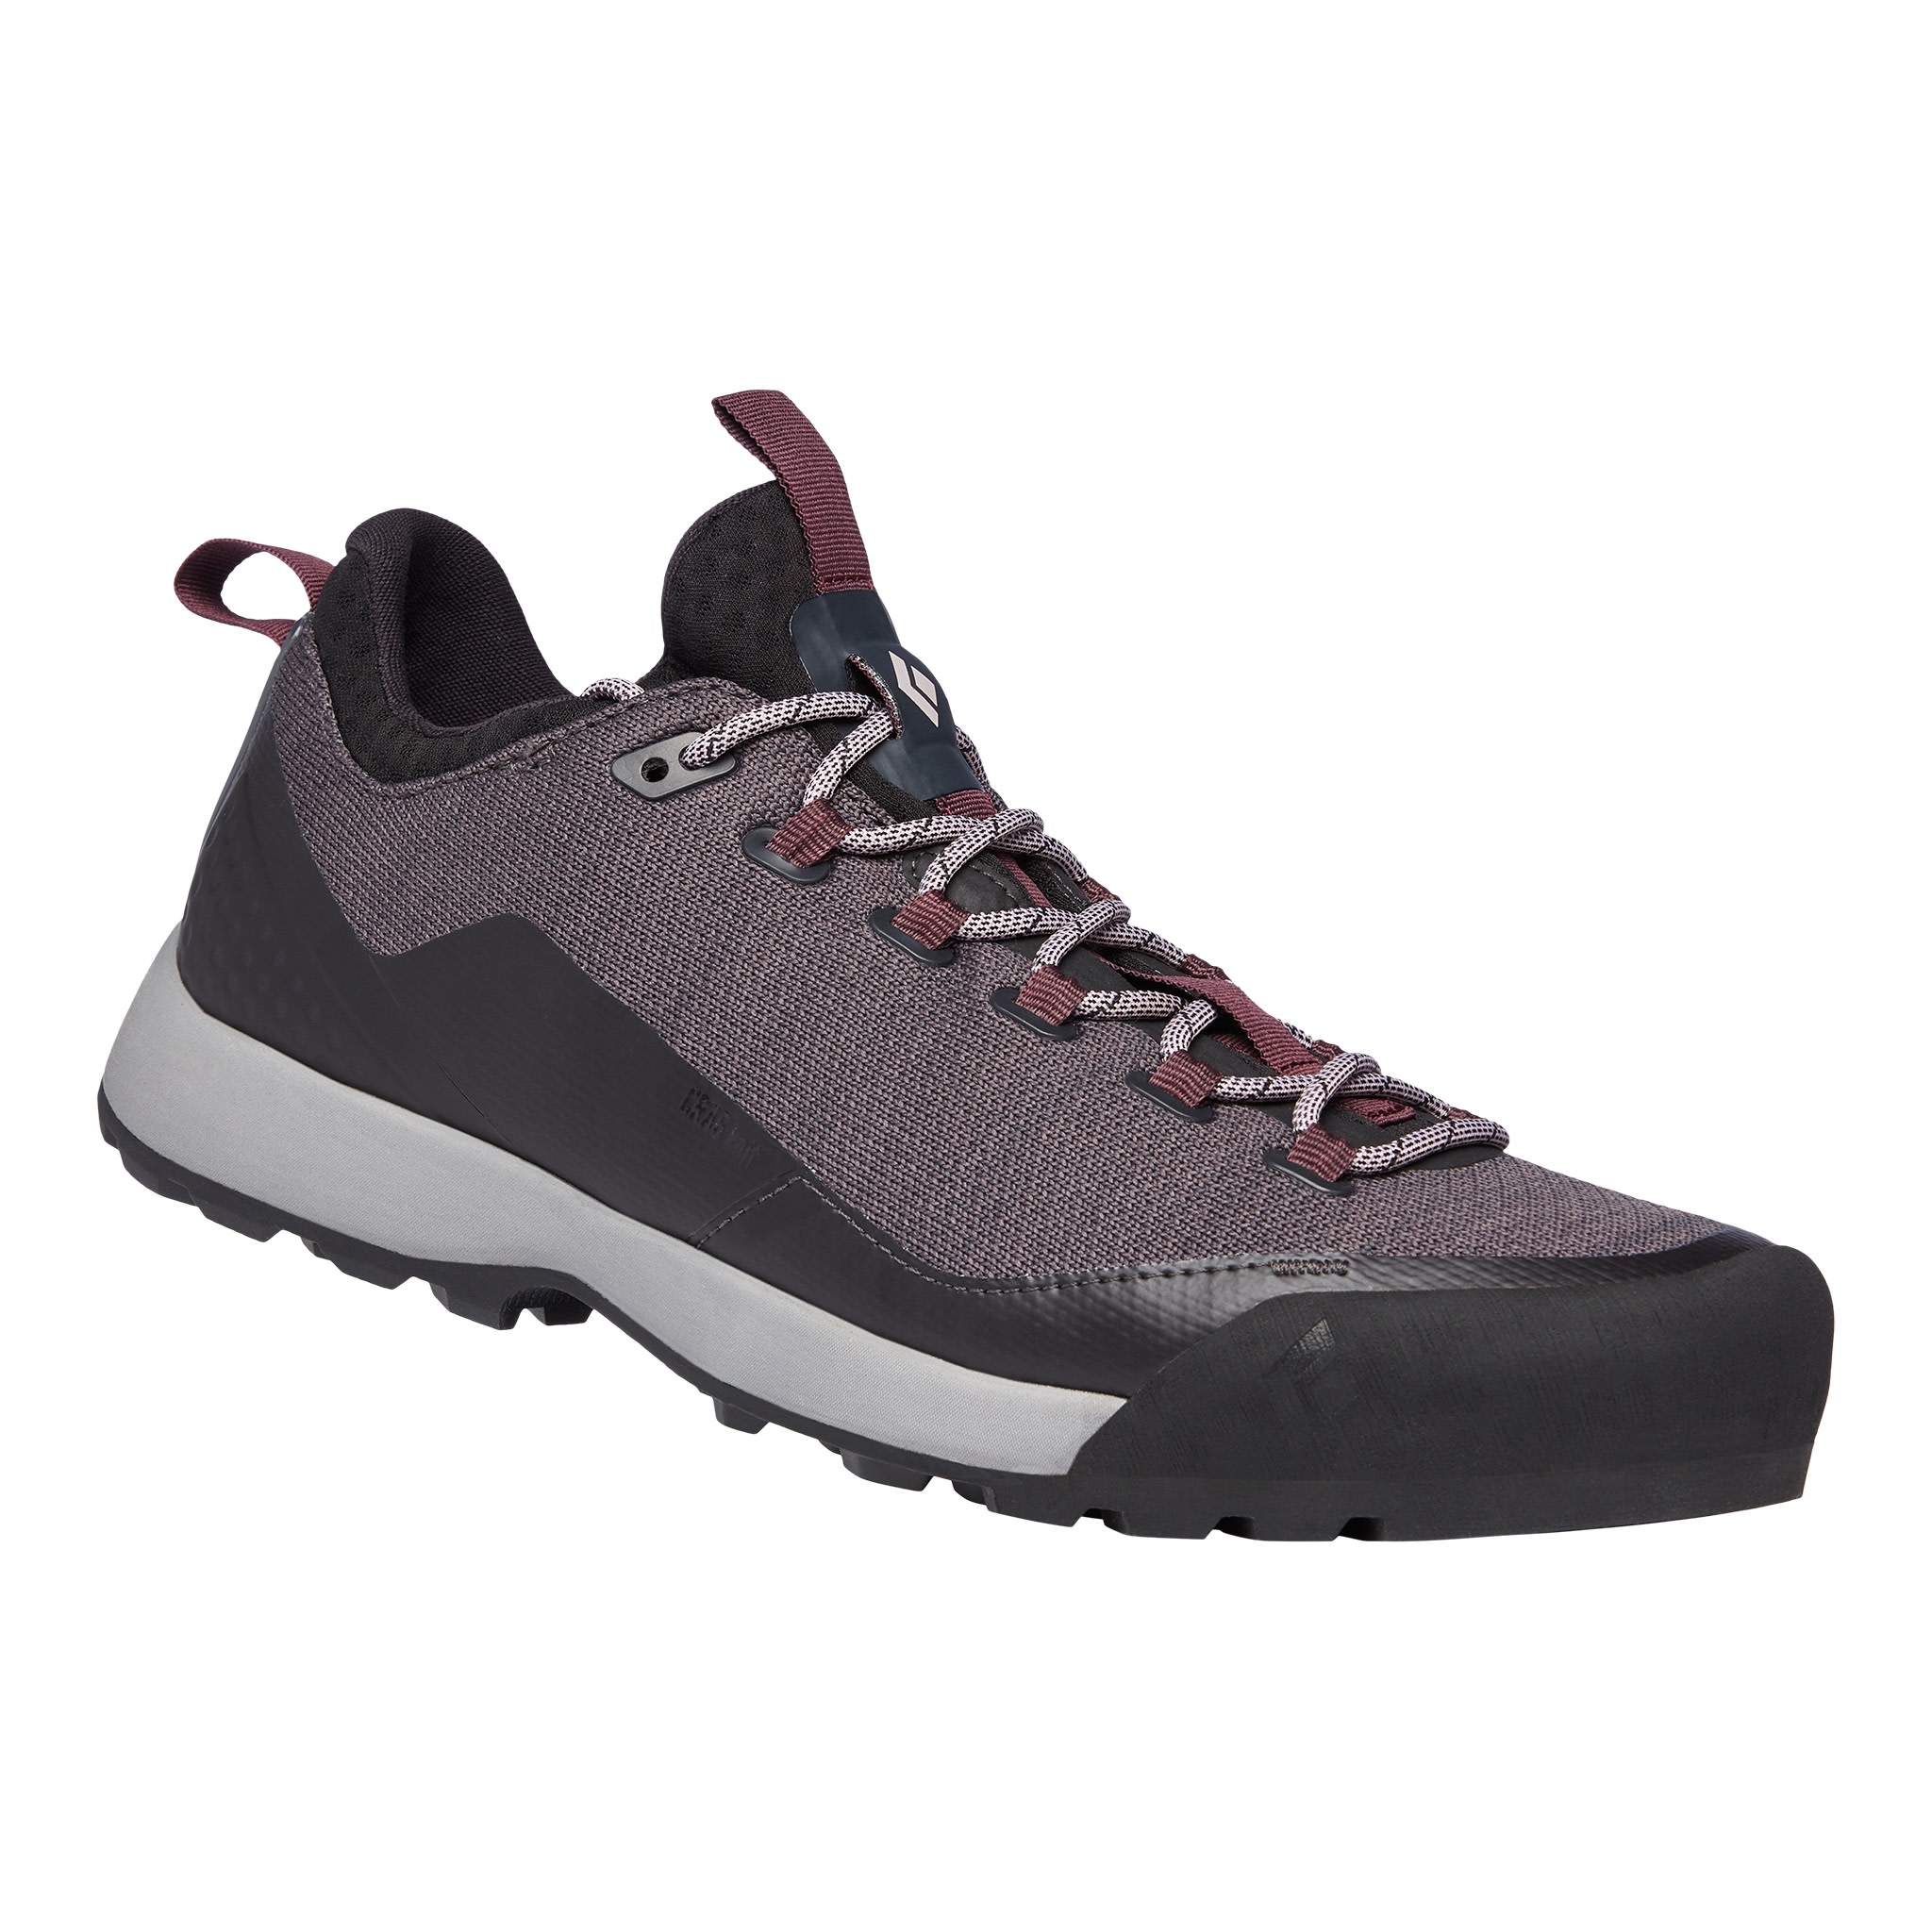 Black Diamond Women’s Mission LT Approach Shoes Anthracite-Wisteria